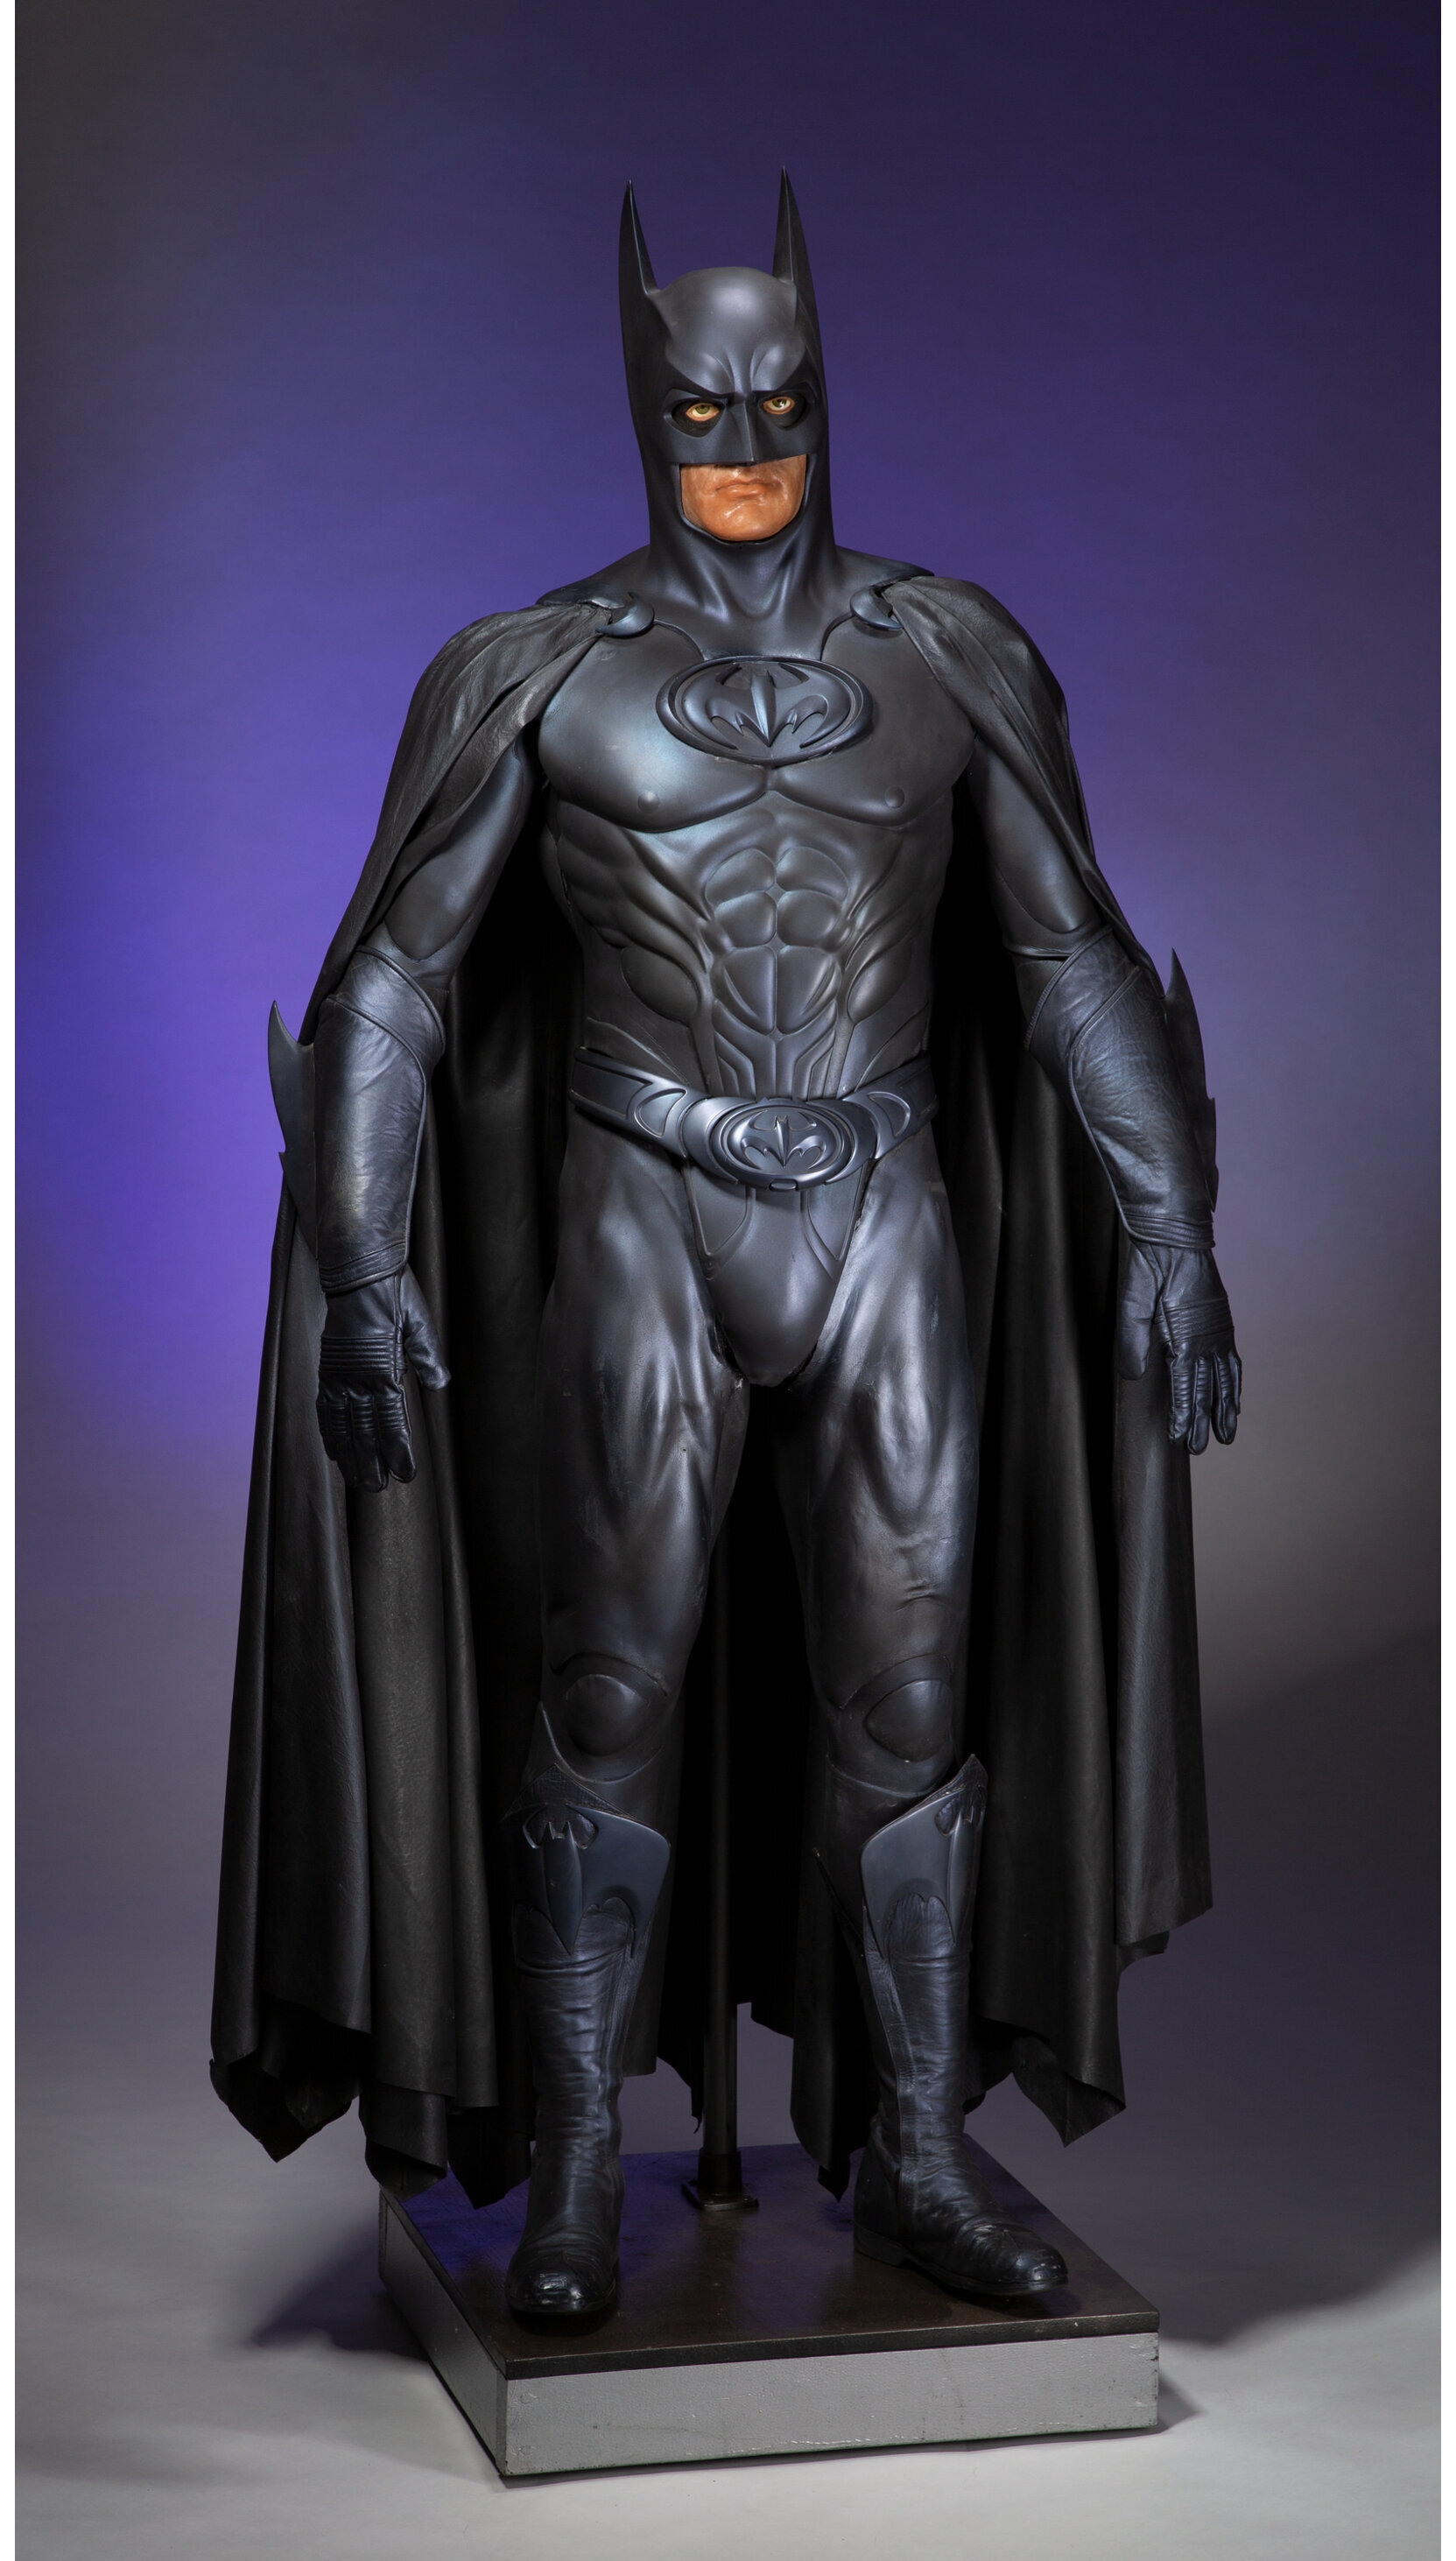 Batman suit worn by George Clooney in ‘Batman & Robin,’ $57,500. Image courtesy of Heritage Auctions